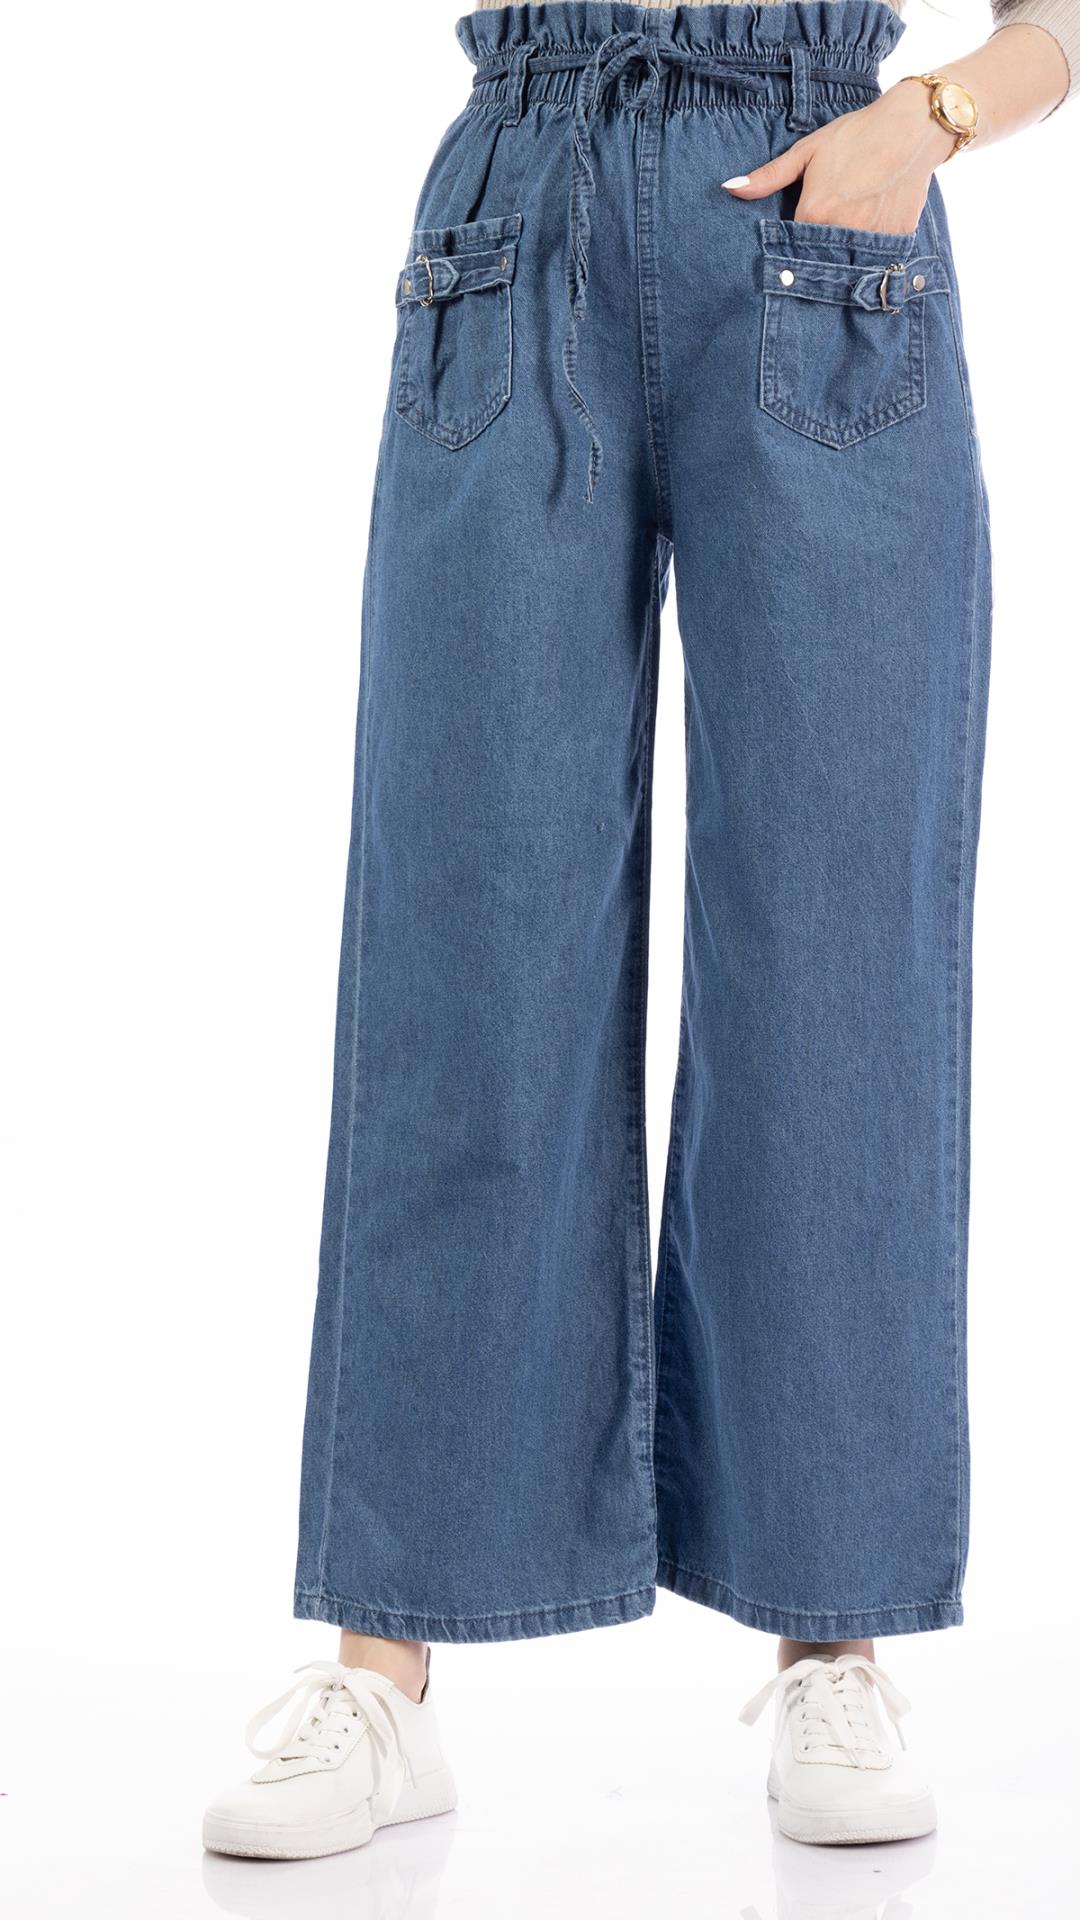 jeans with two front pockets